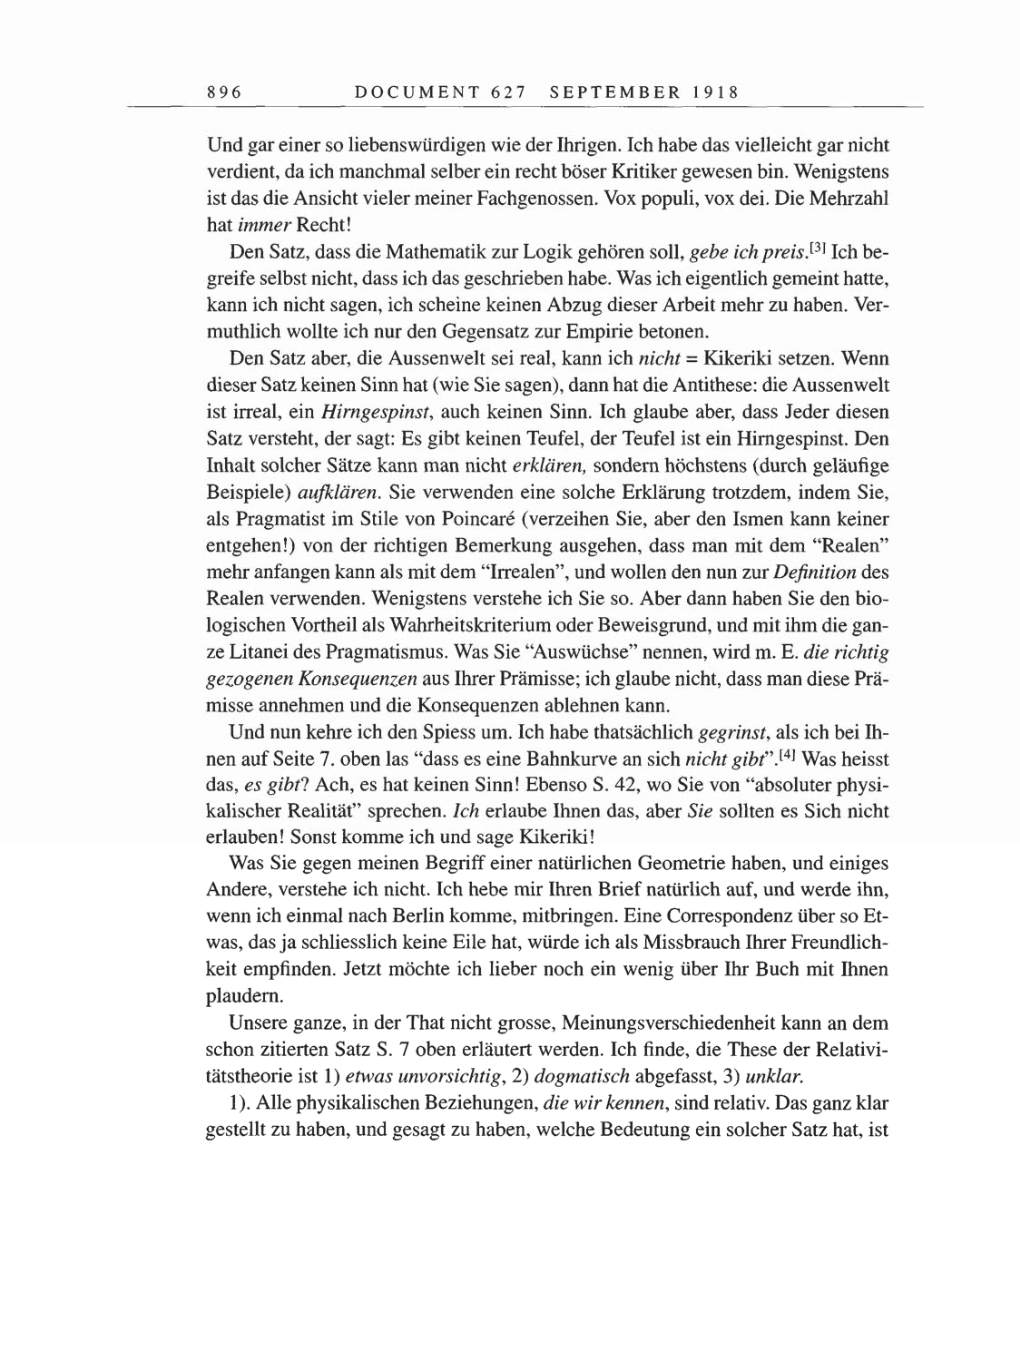 Volume 8, Part B: The Berlin Years: Correspondence 1918 page 896